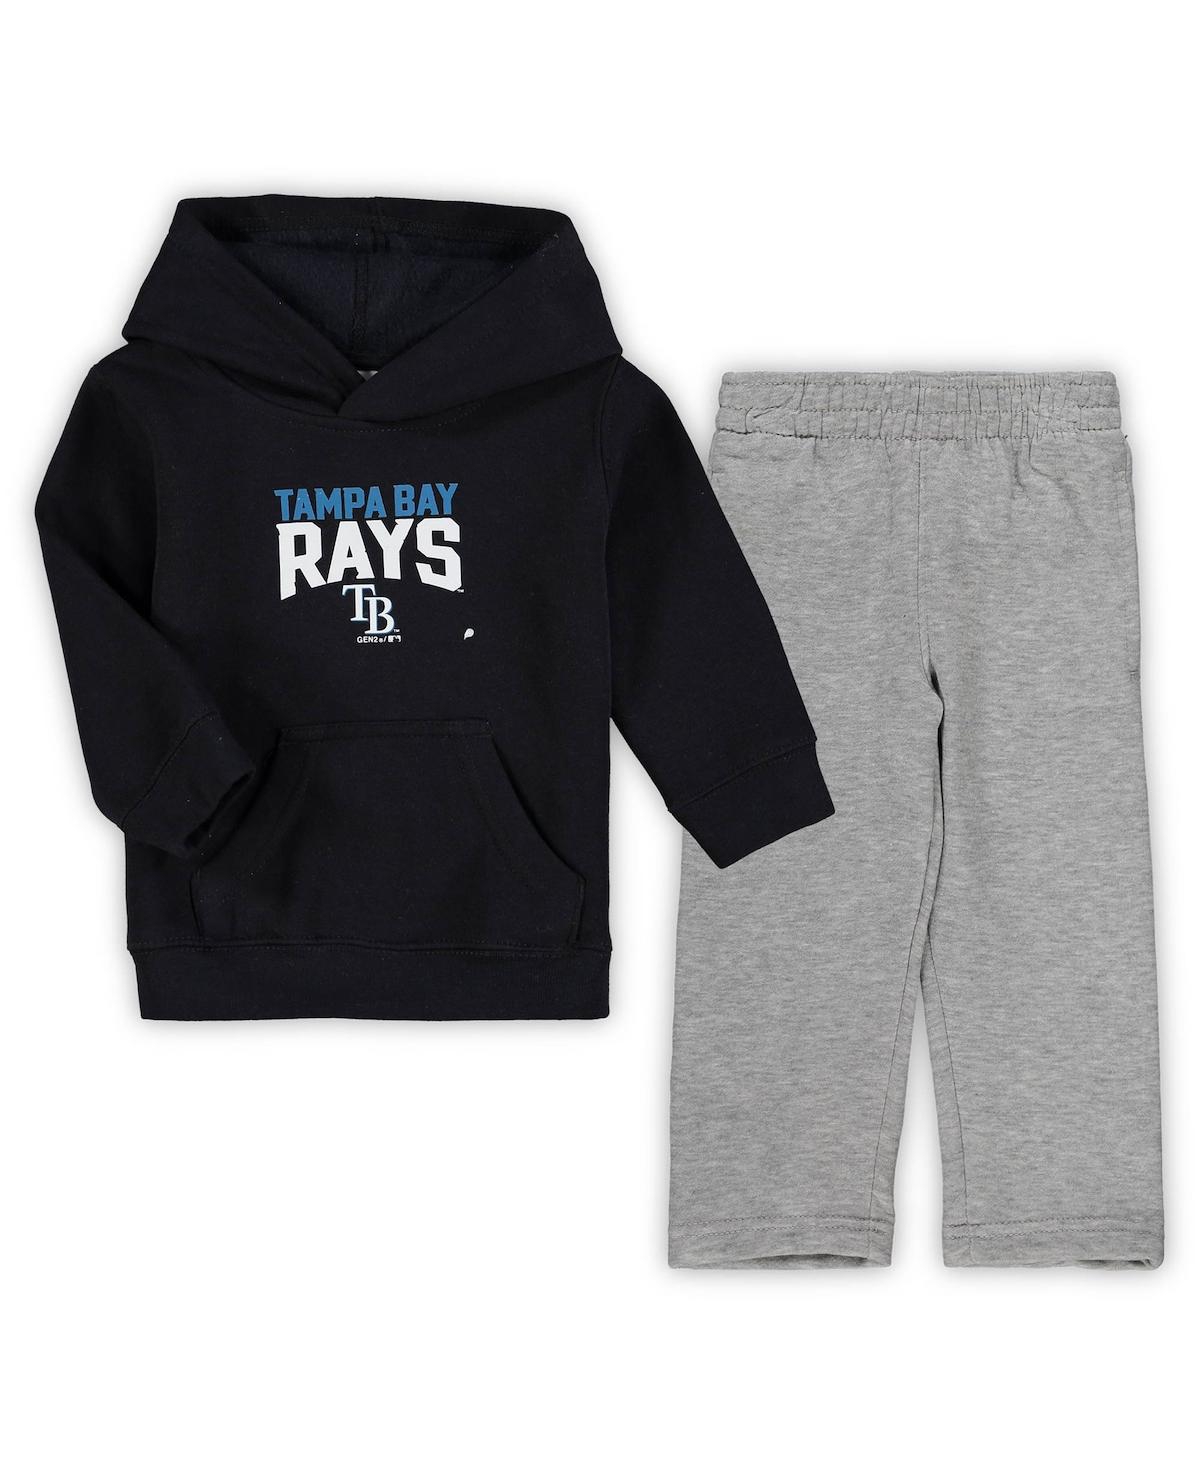 Outerstuff Babies' Toddler Boys Navy, Heathered Gray Tampa Bay Rays Fan Flare Fleece Hoodie And Pants Set In Navy,heathered Gray